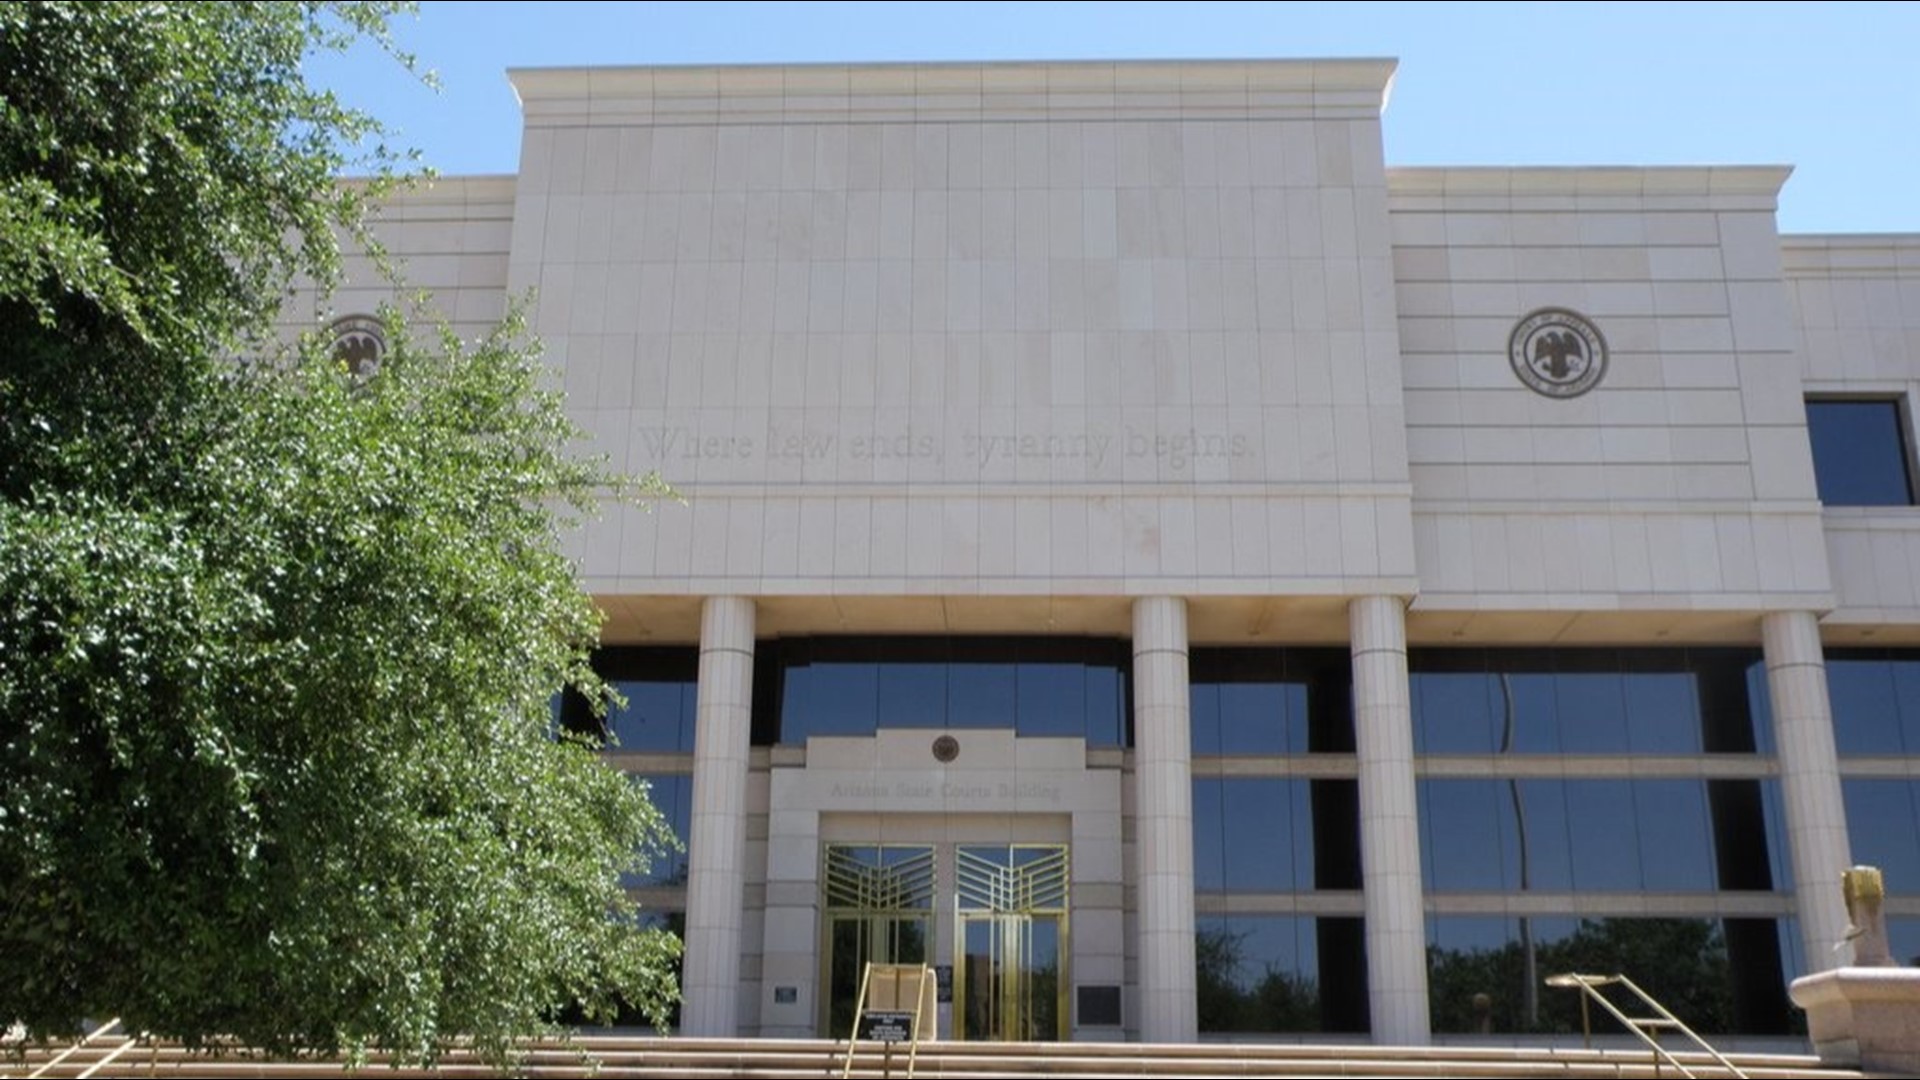 The Arizona Supreme Court ruled in favor of a Phoenix business, Brush and Nib, Monday morning in a religious freedom case. The state's supreme court ruled that the wedding invitation business can reject customers planning same-sex marriages. At Issue was a Phoenix law banning discrimination against LGBTQ Phoenicians.